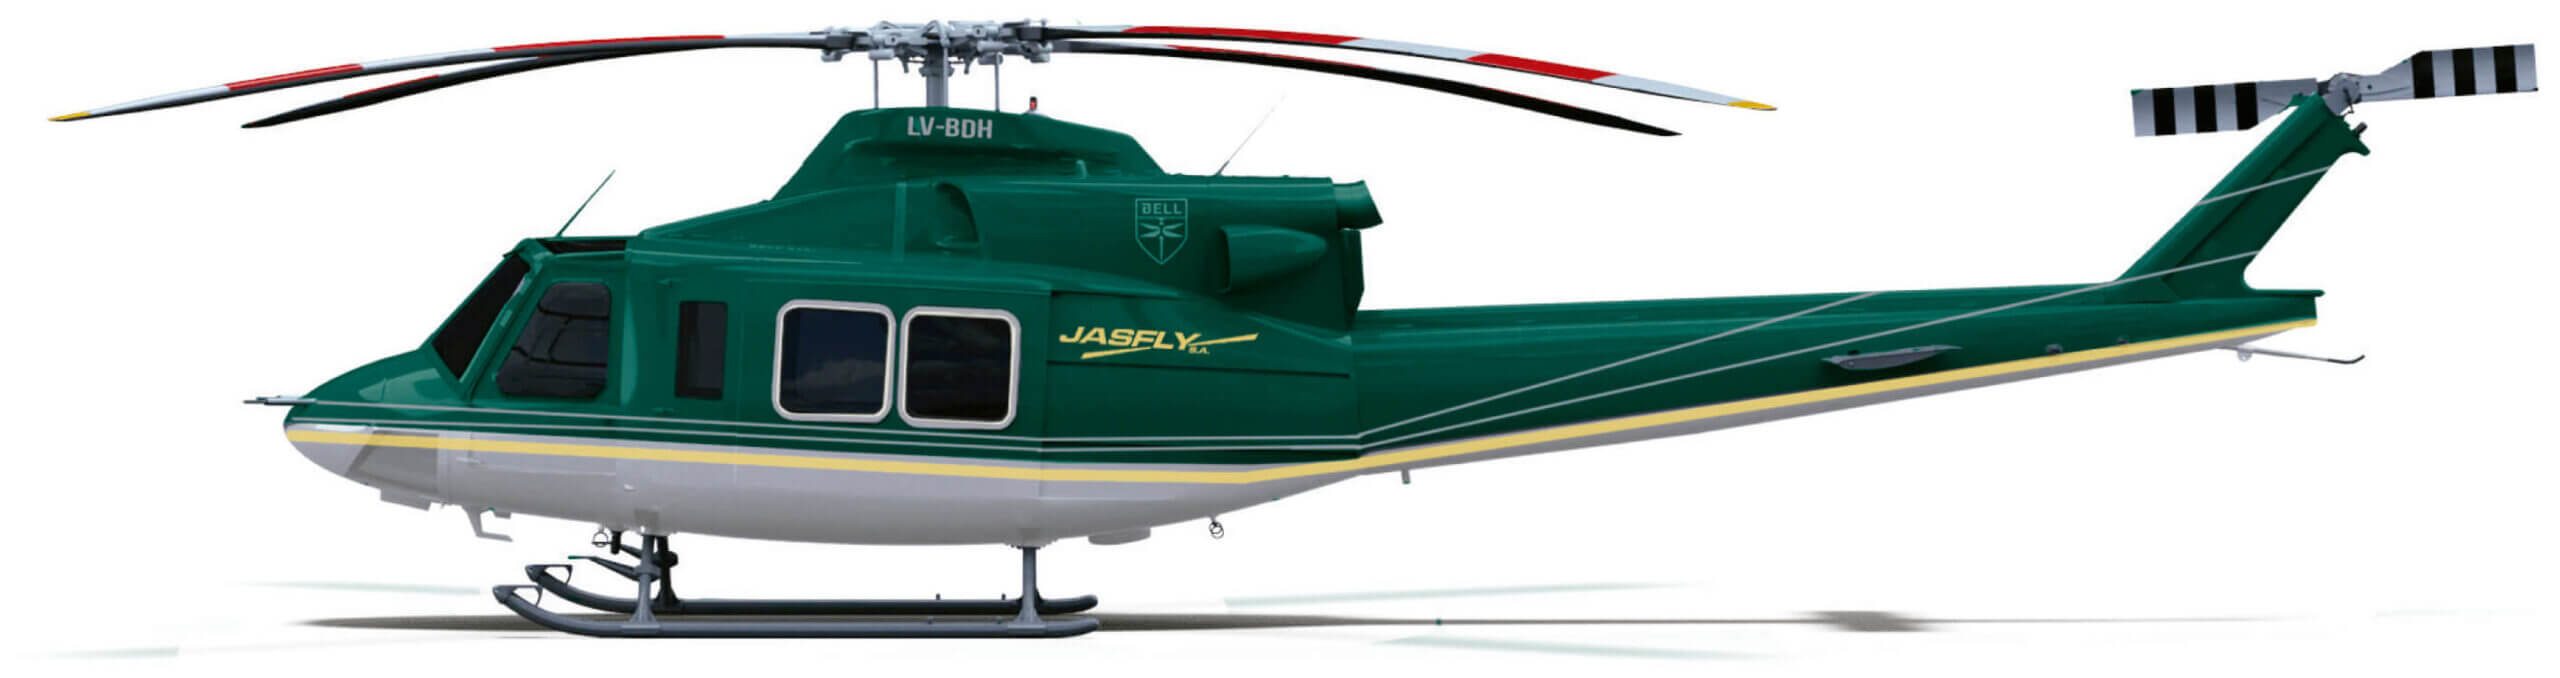 Bell 412 EP